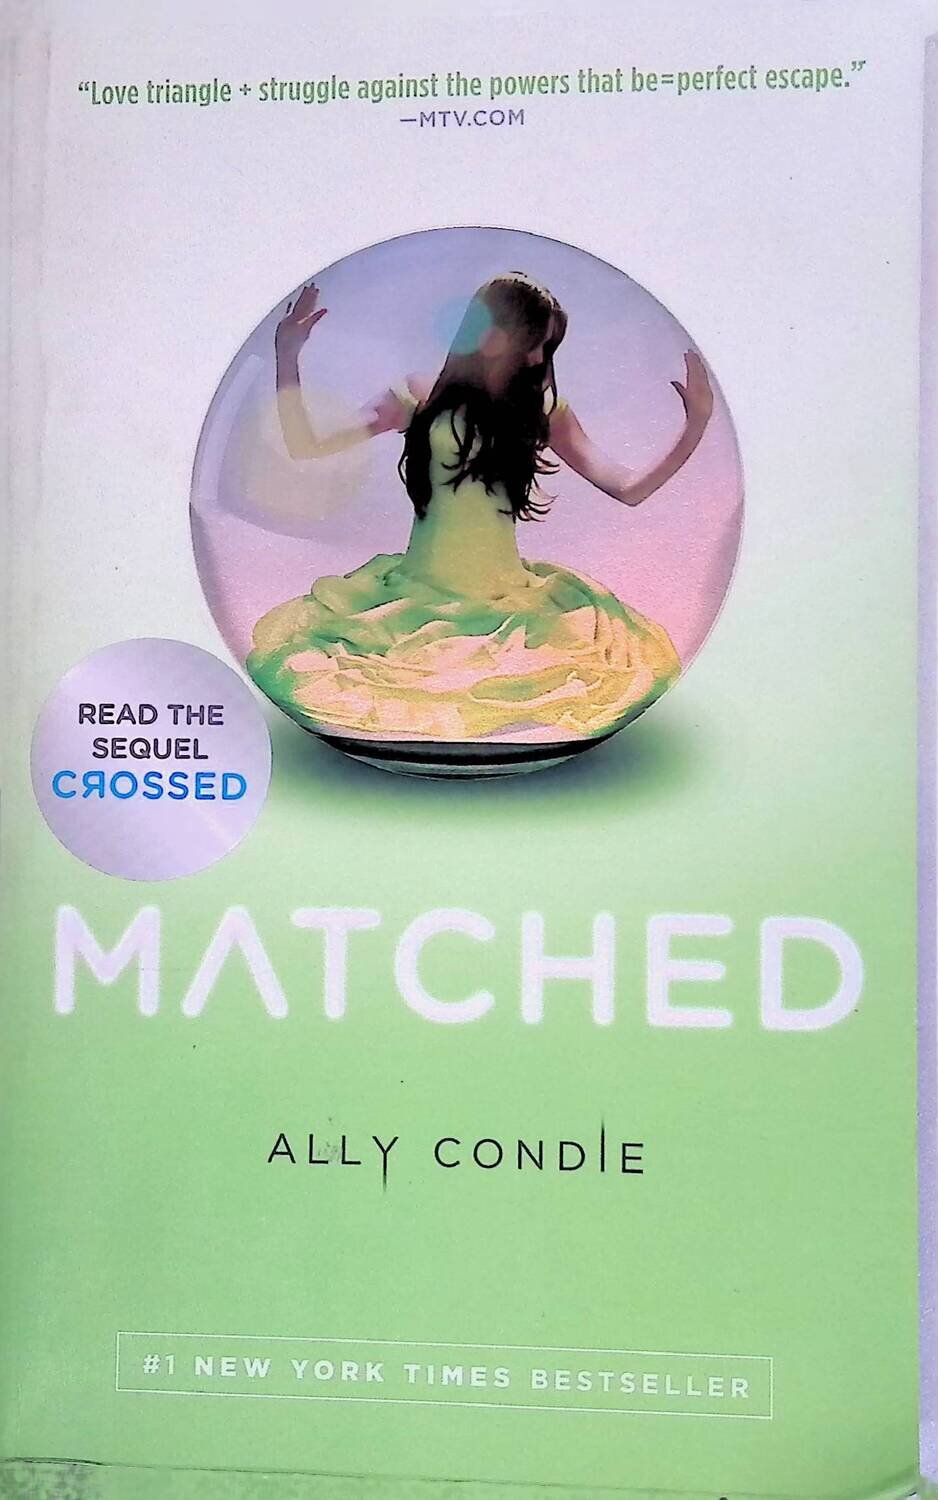 Matched; Condie Ally